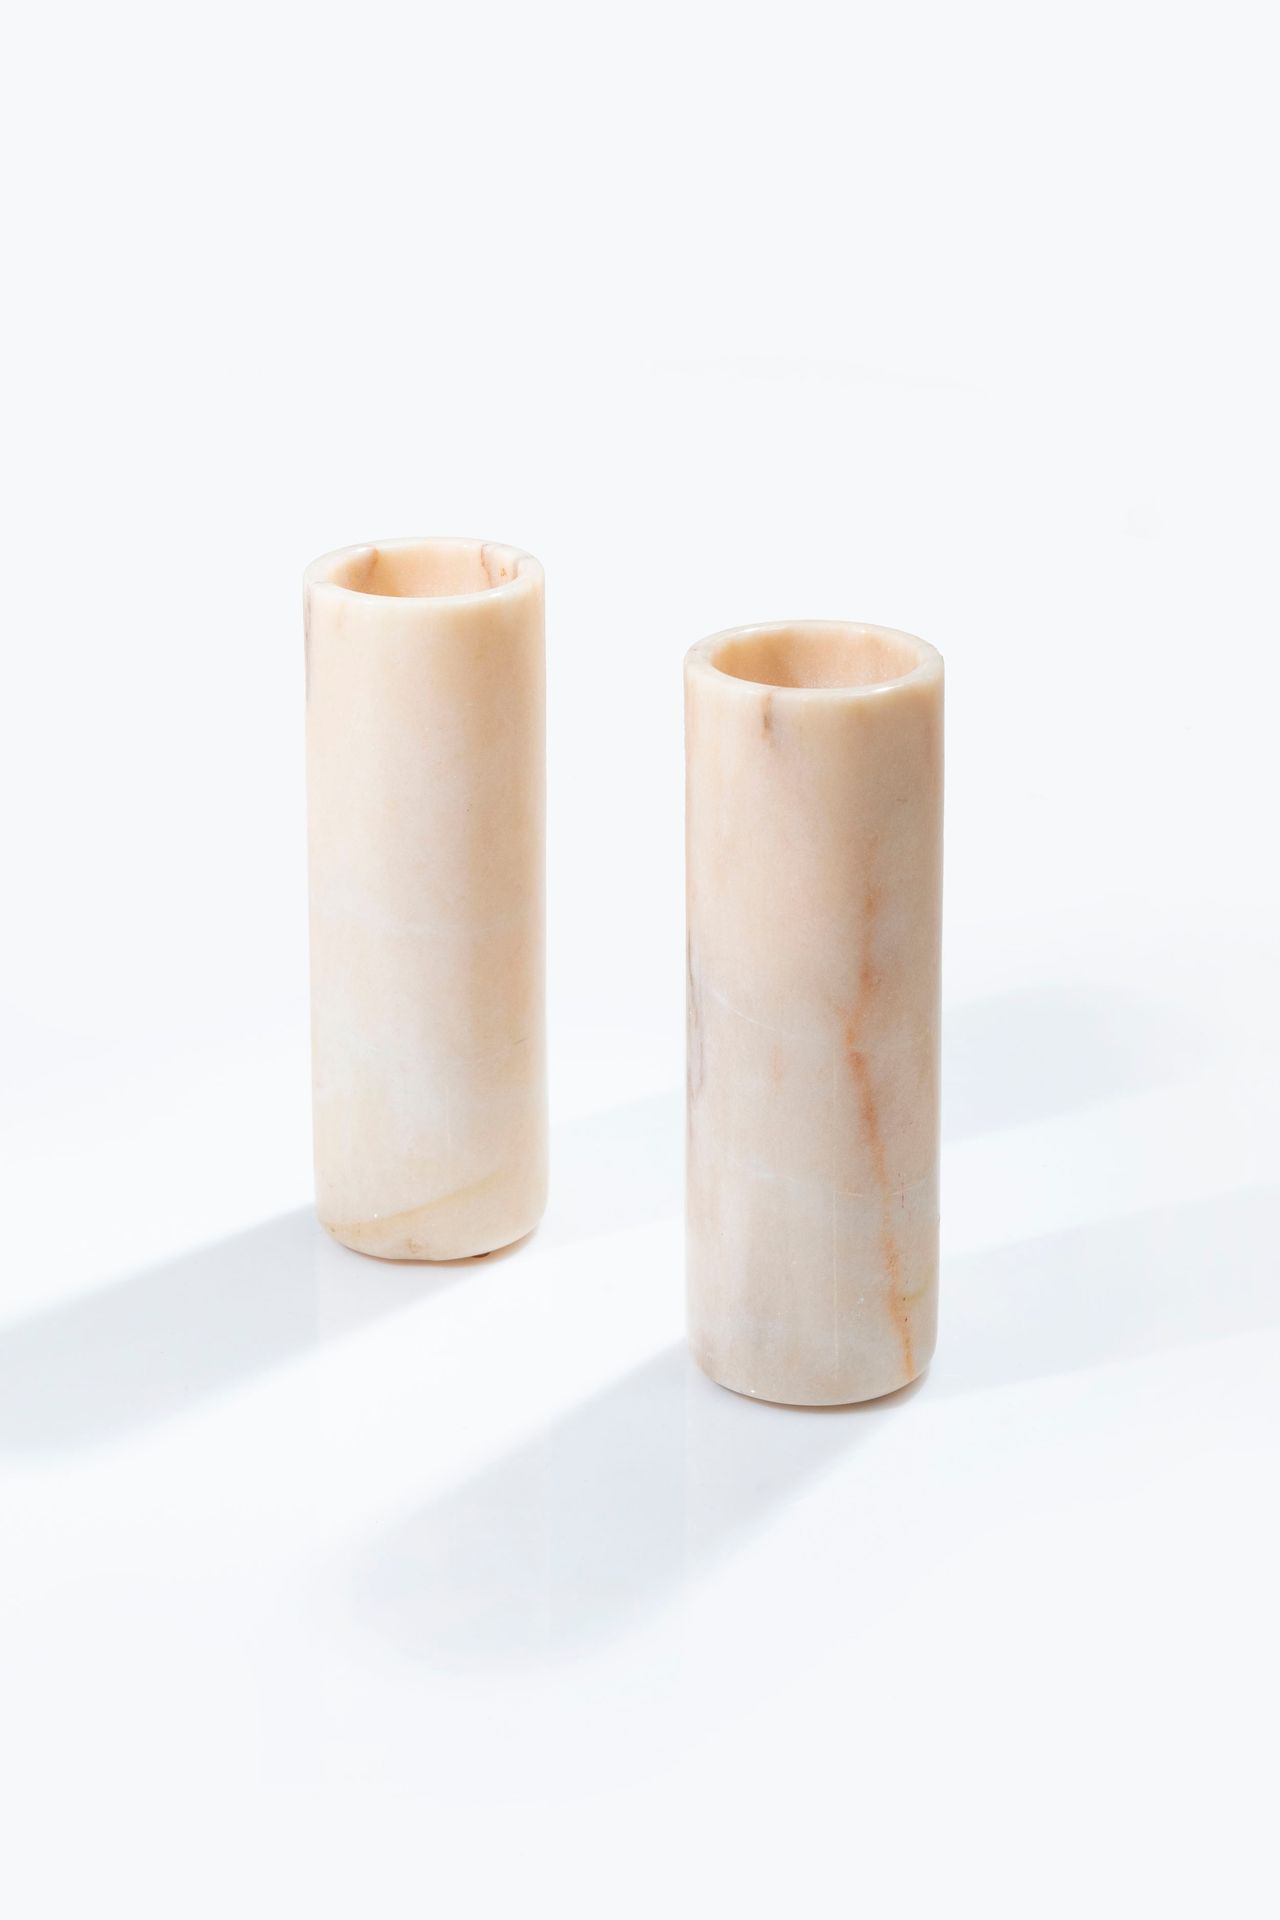 UP&UP Pair of vases. Turned alabaster. Italy 1970s.
29x10x10 cm.
A PAIR OF VASES&hellip;